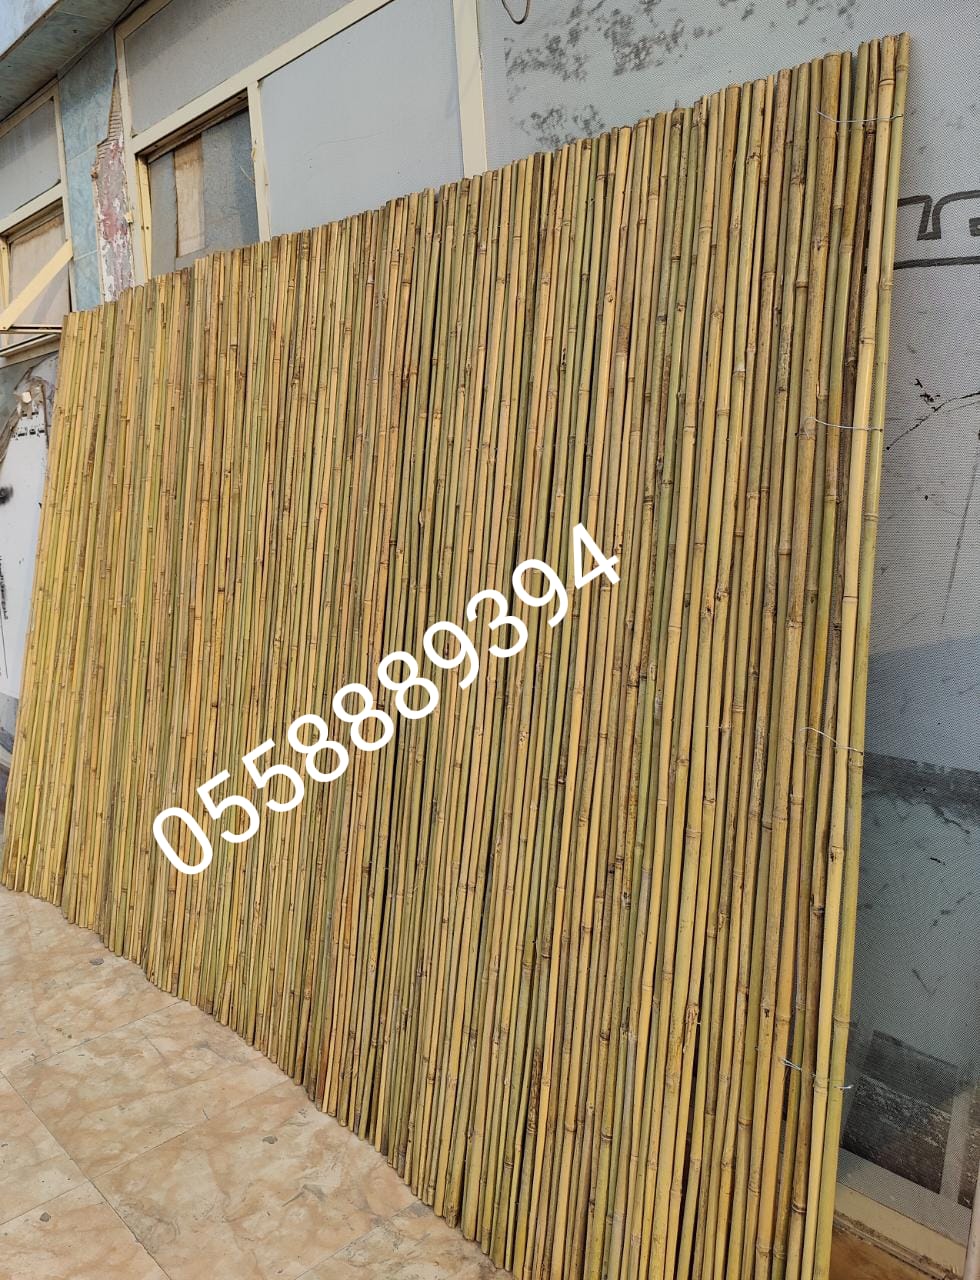 THICKER BAMBOO FENCE AND BAMBOO POLES